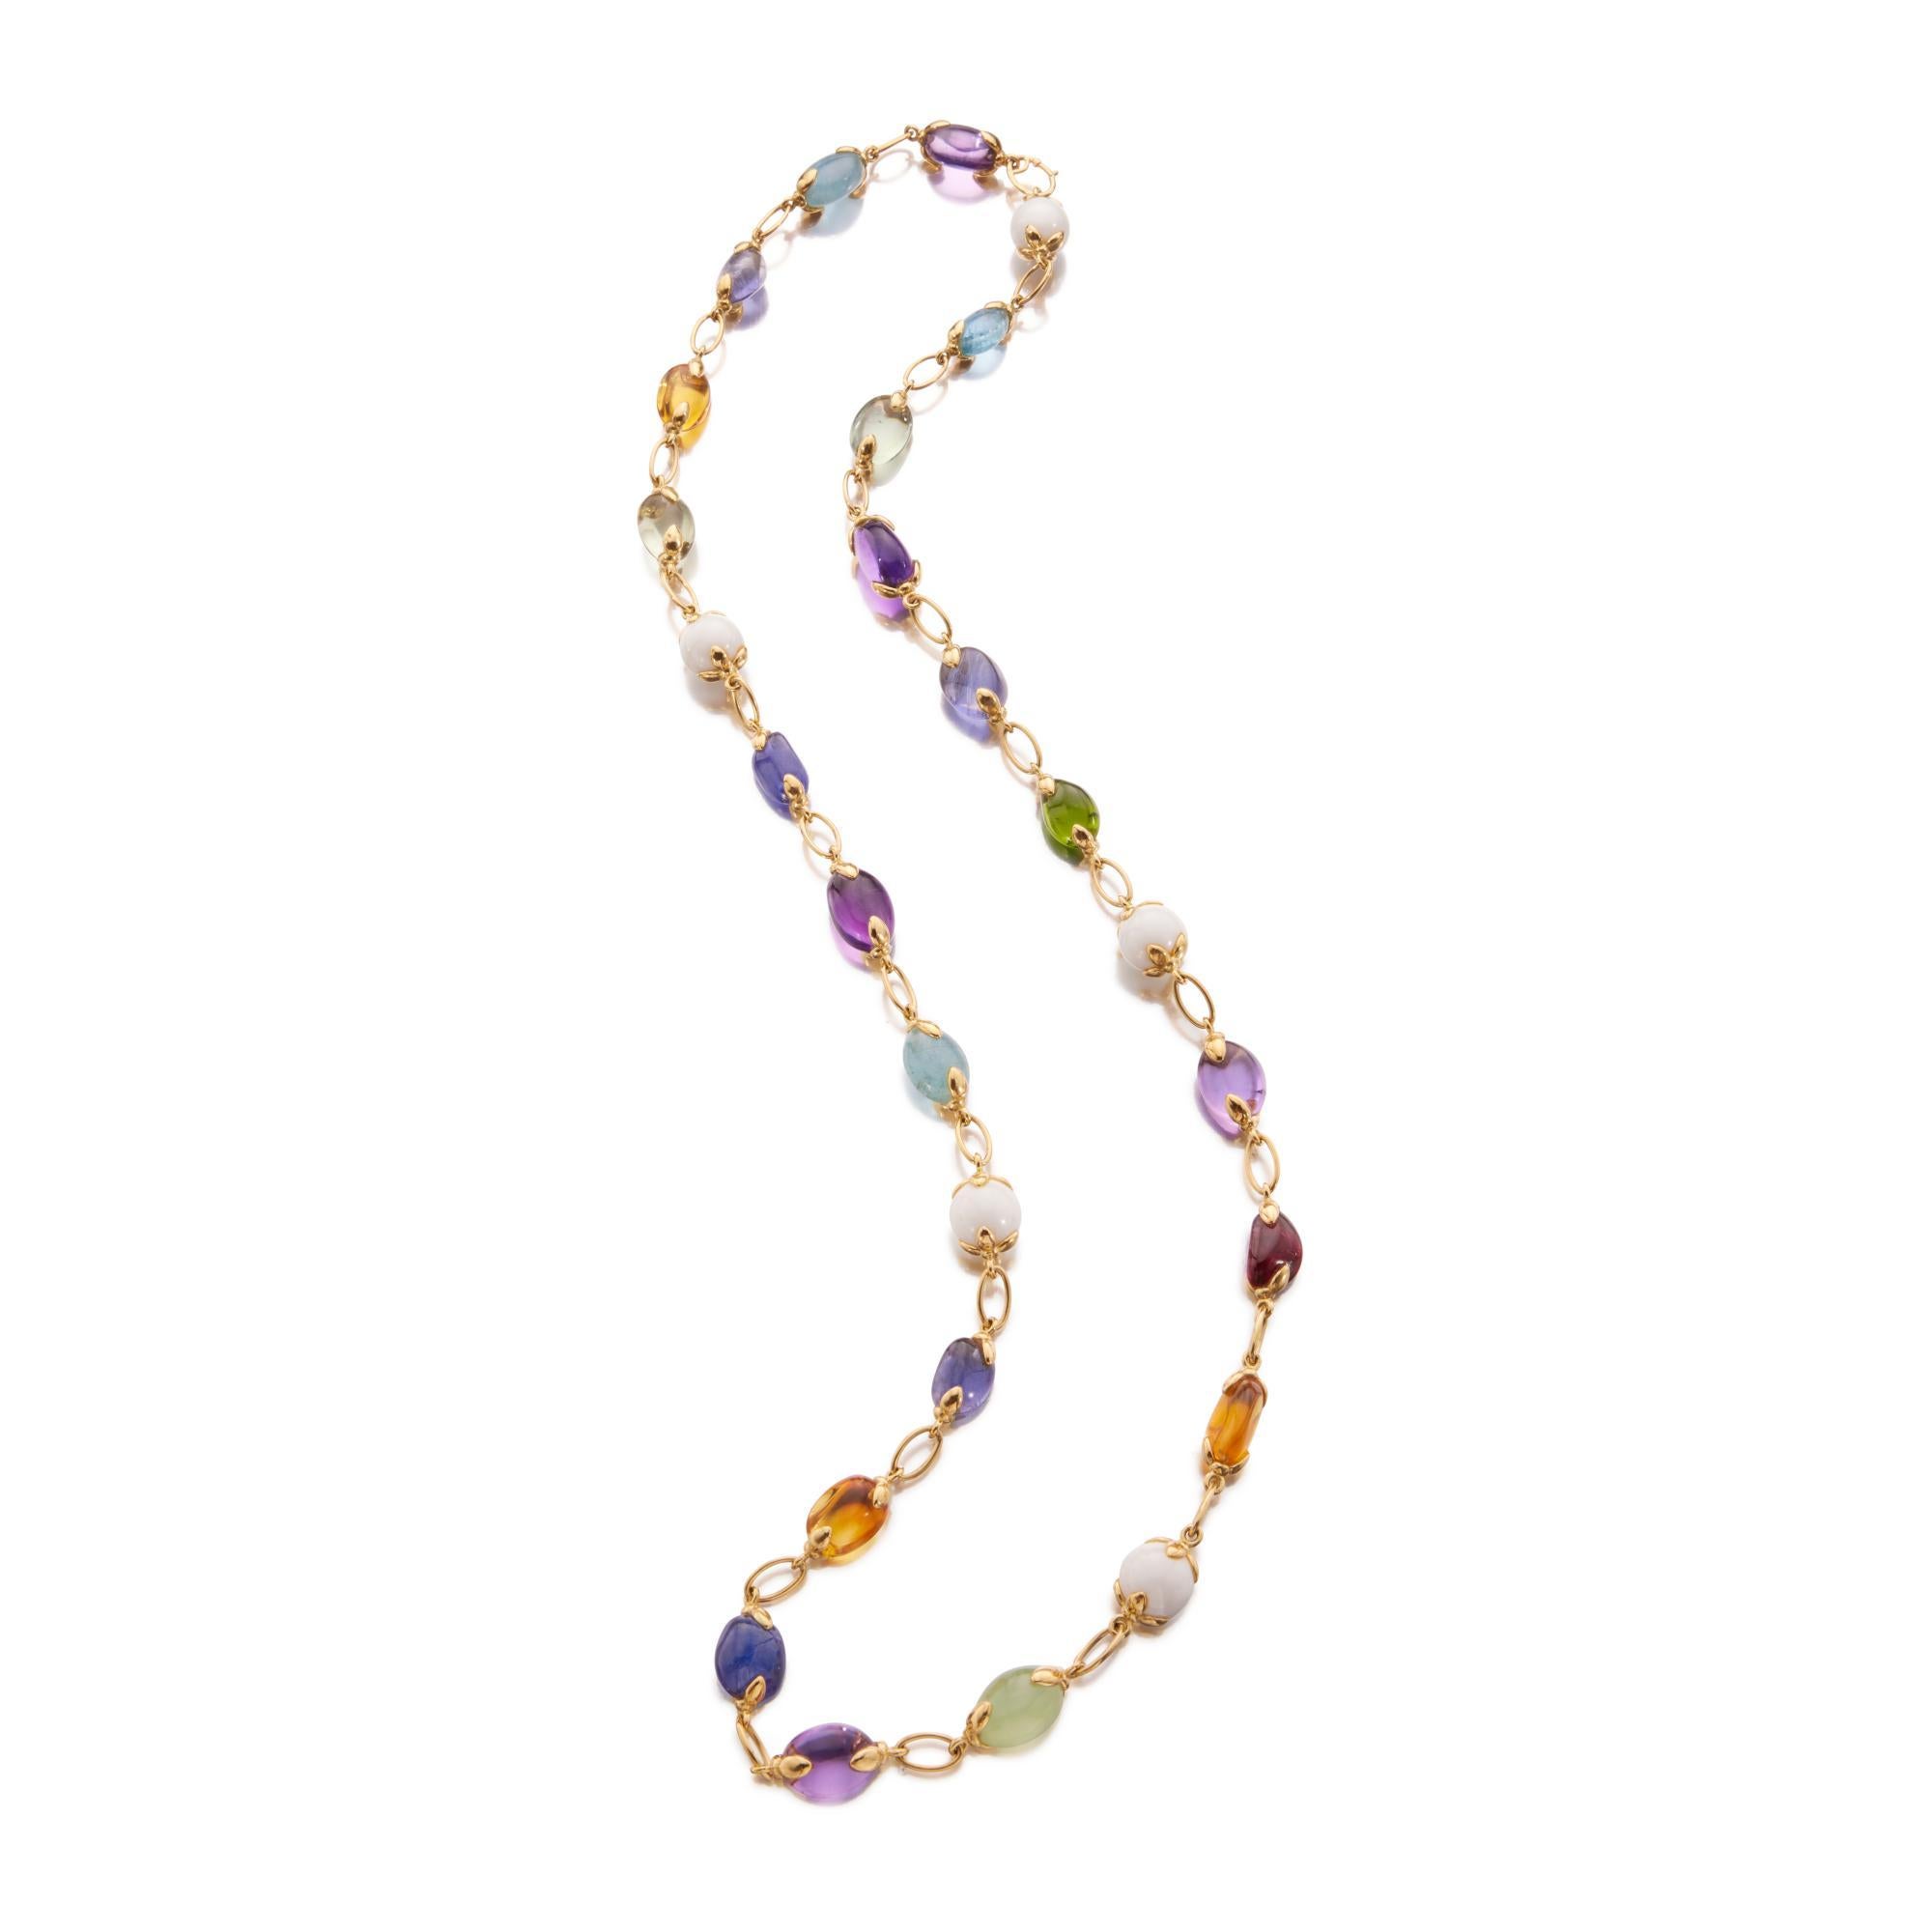 Verdura Gold and    Gem-set and Ceramic 'Fulco' Necklace This necklace is composed
of a variety of tumbled gemstones including amethyst, citrine, peridot, tanzanite, iolite, green quartz, aquamarine, prehnite and rubellite, interspersed with ceramic